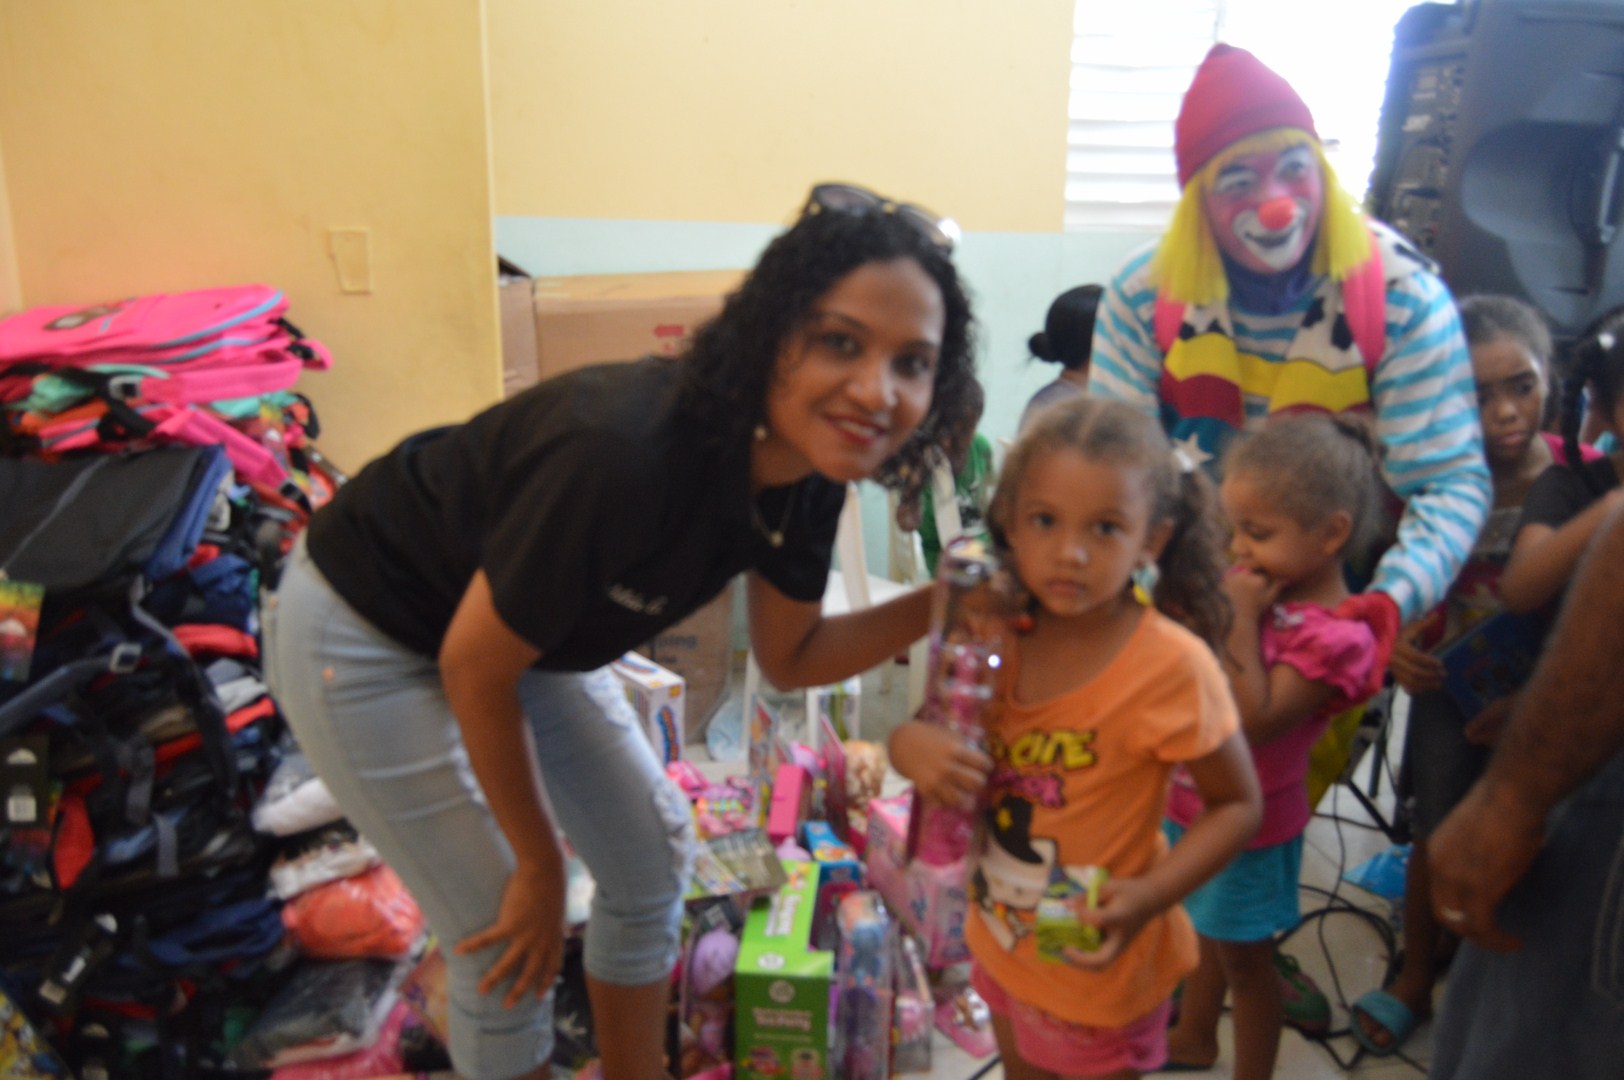 A staff and a girl holding a Barbie, the clown and another child behind them